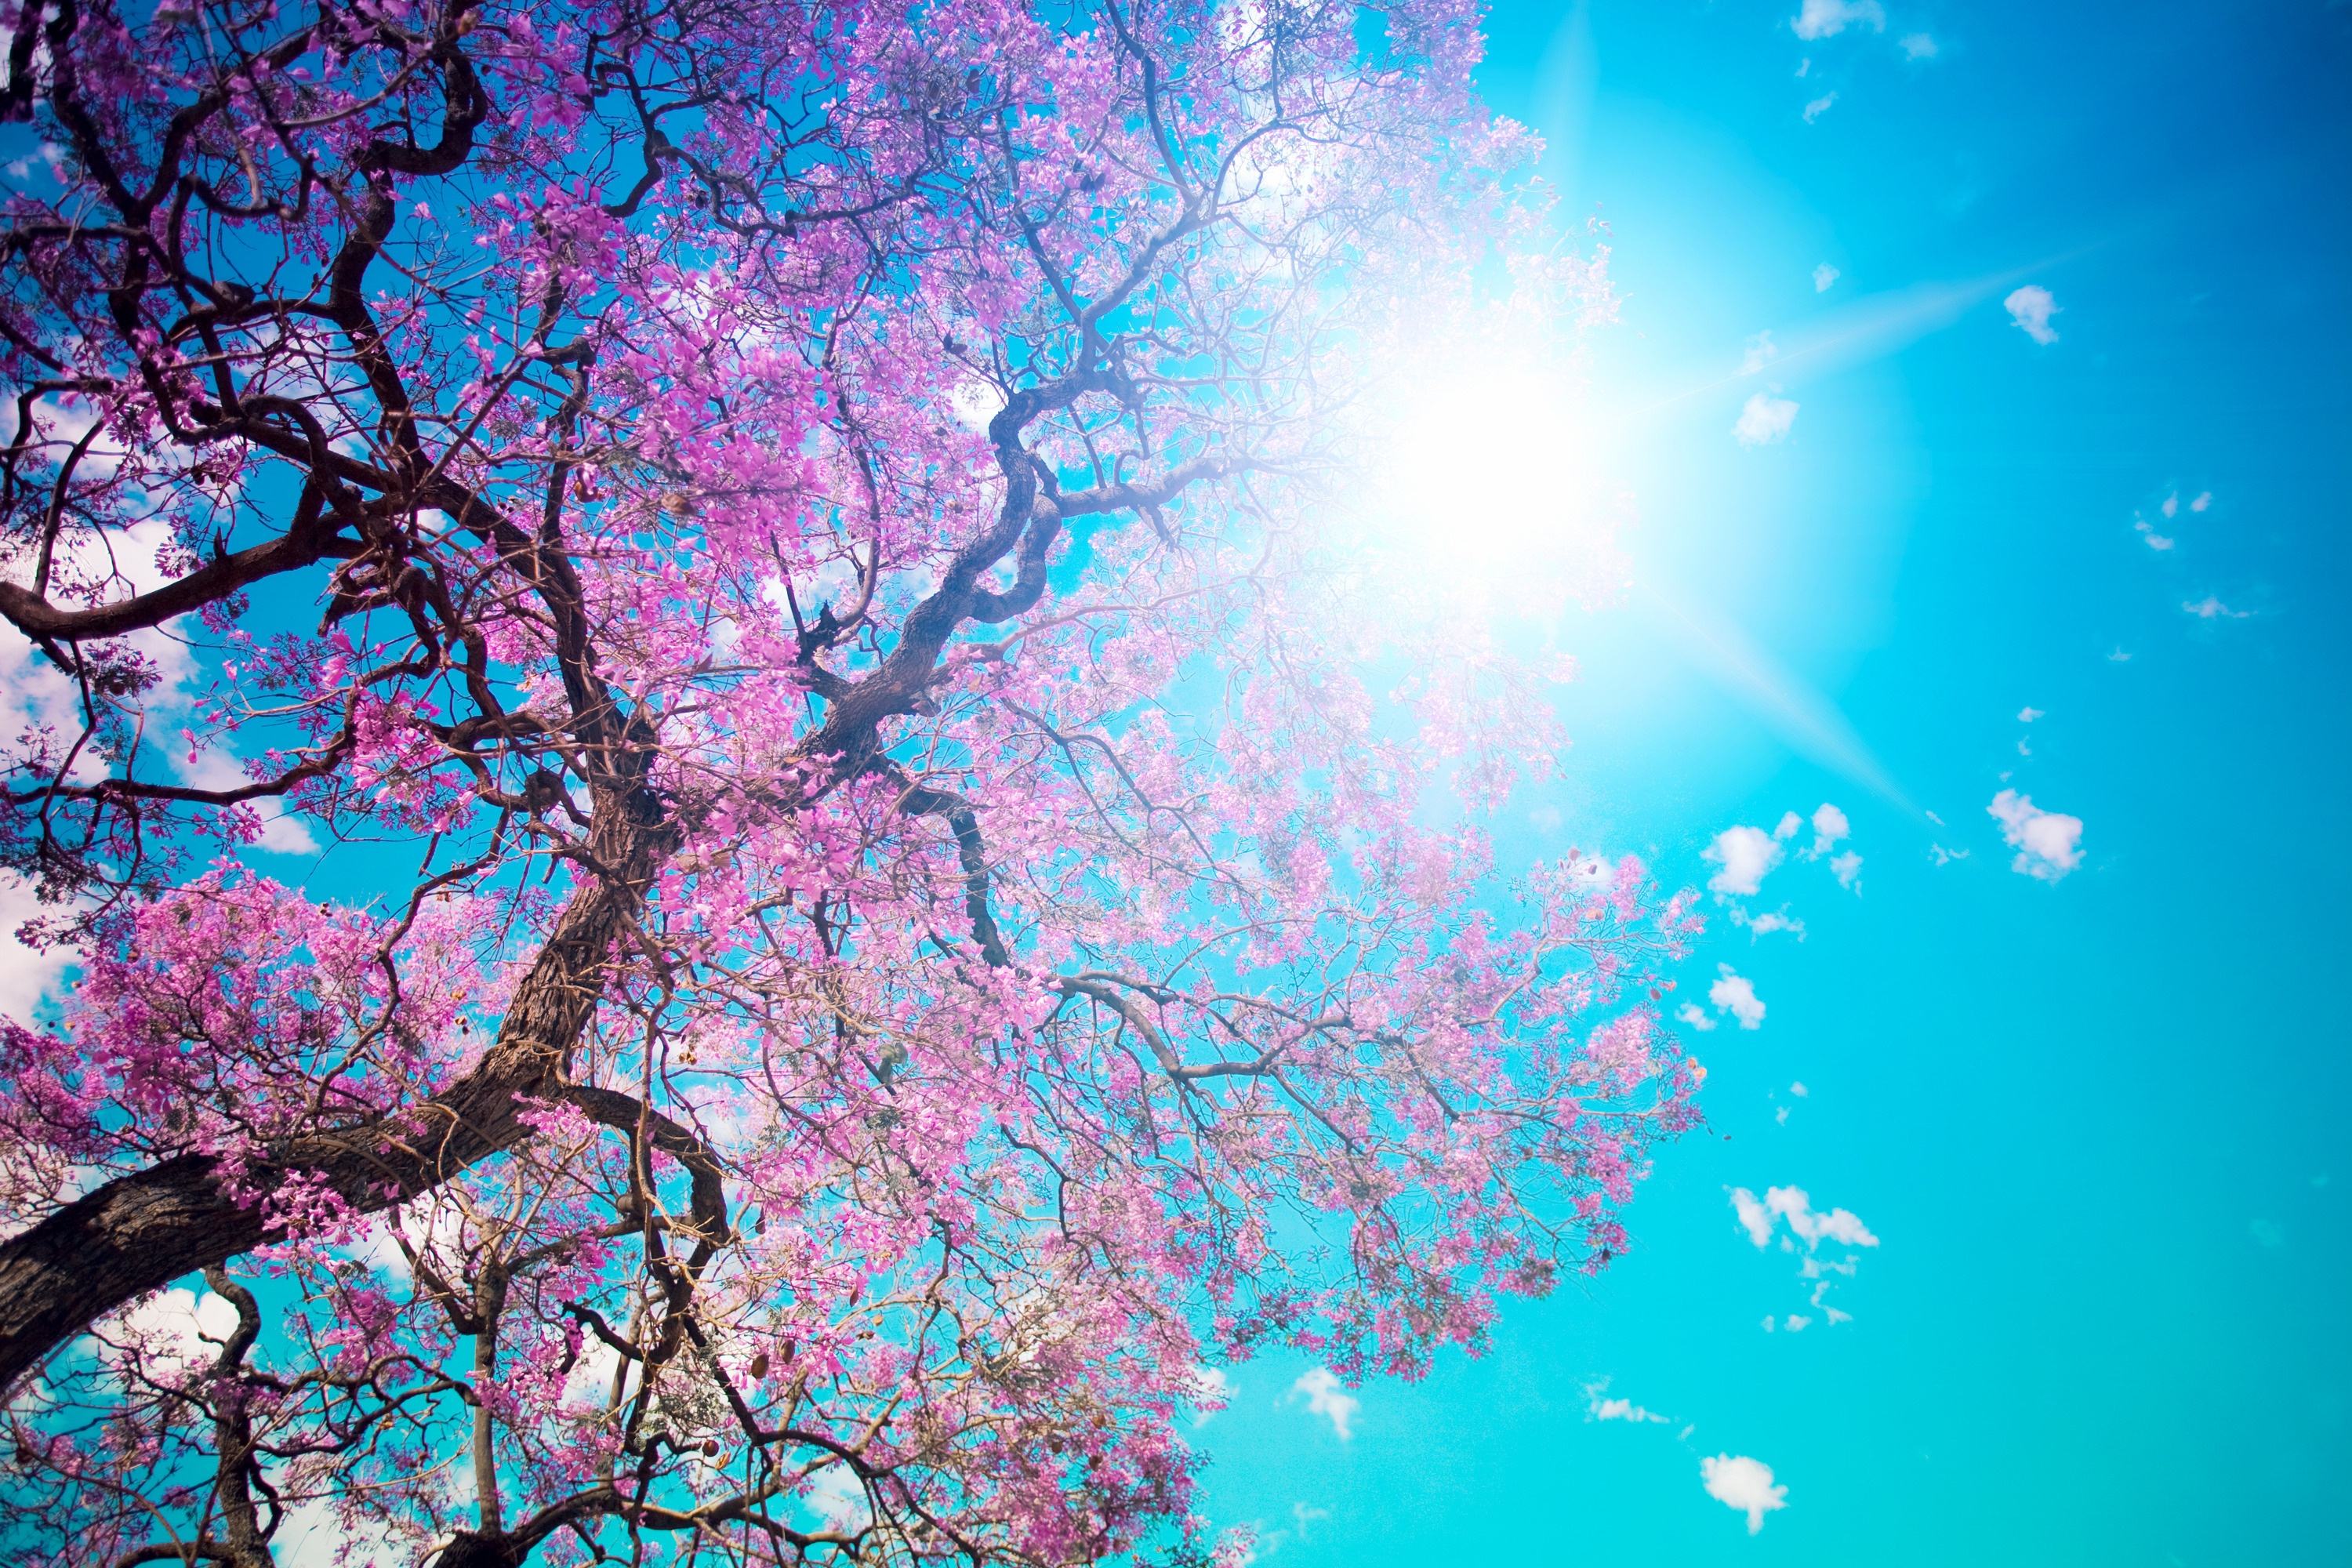 Nature's beauty depicted by a sunlit tree in full bloom during the spring season.